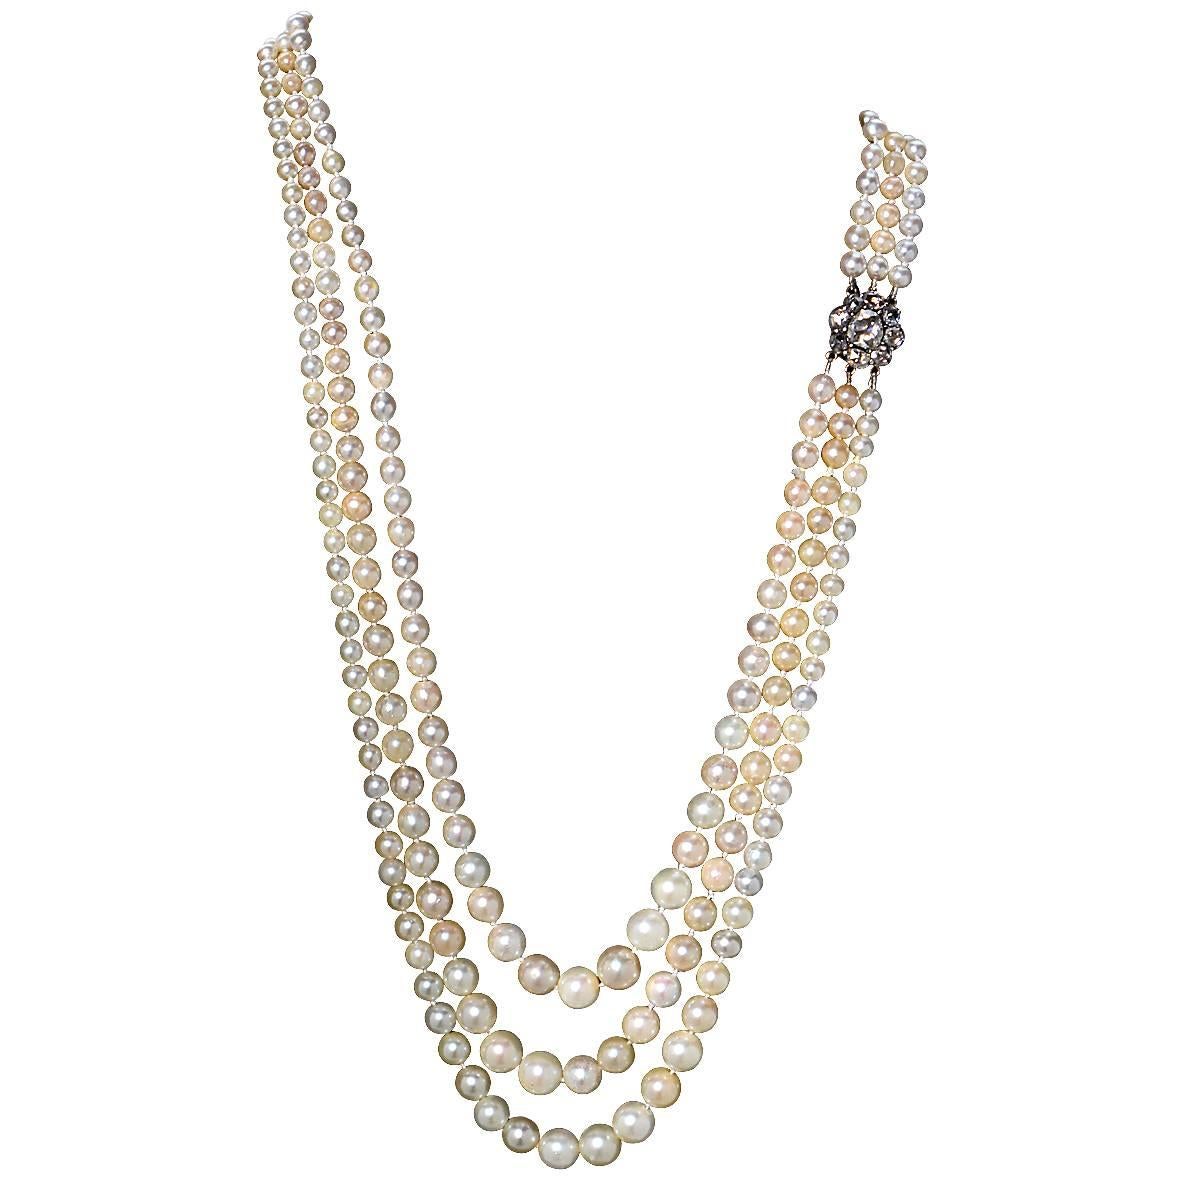 7 strand vintage pearl necklace featuring rose gold clasp with 8 rose cut diamonds weighing 2.00cts total.

This diamond and pearl necklace is accompanied by a retail appraisal performed by a Graduate Gemologist.